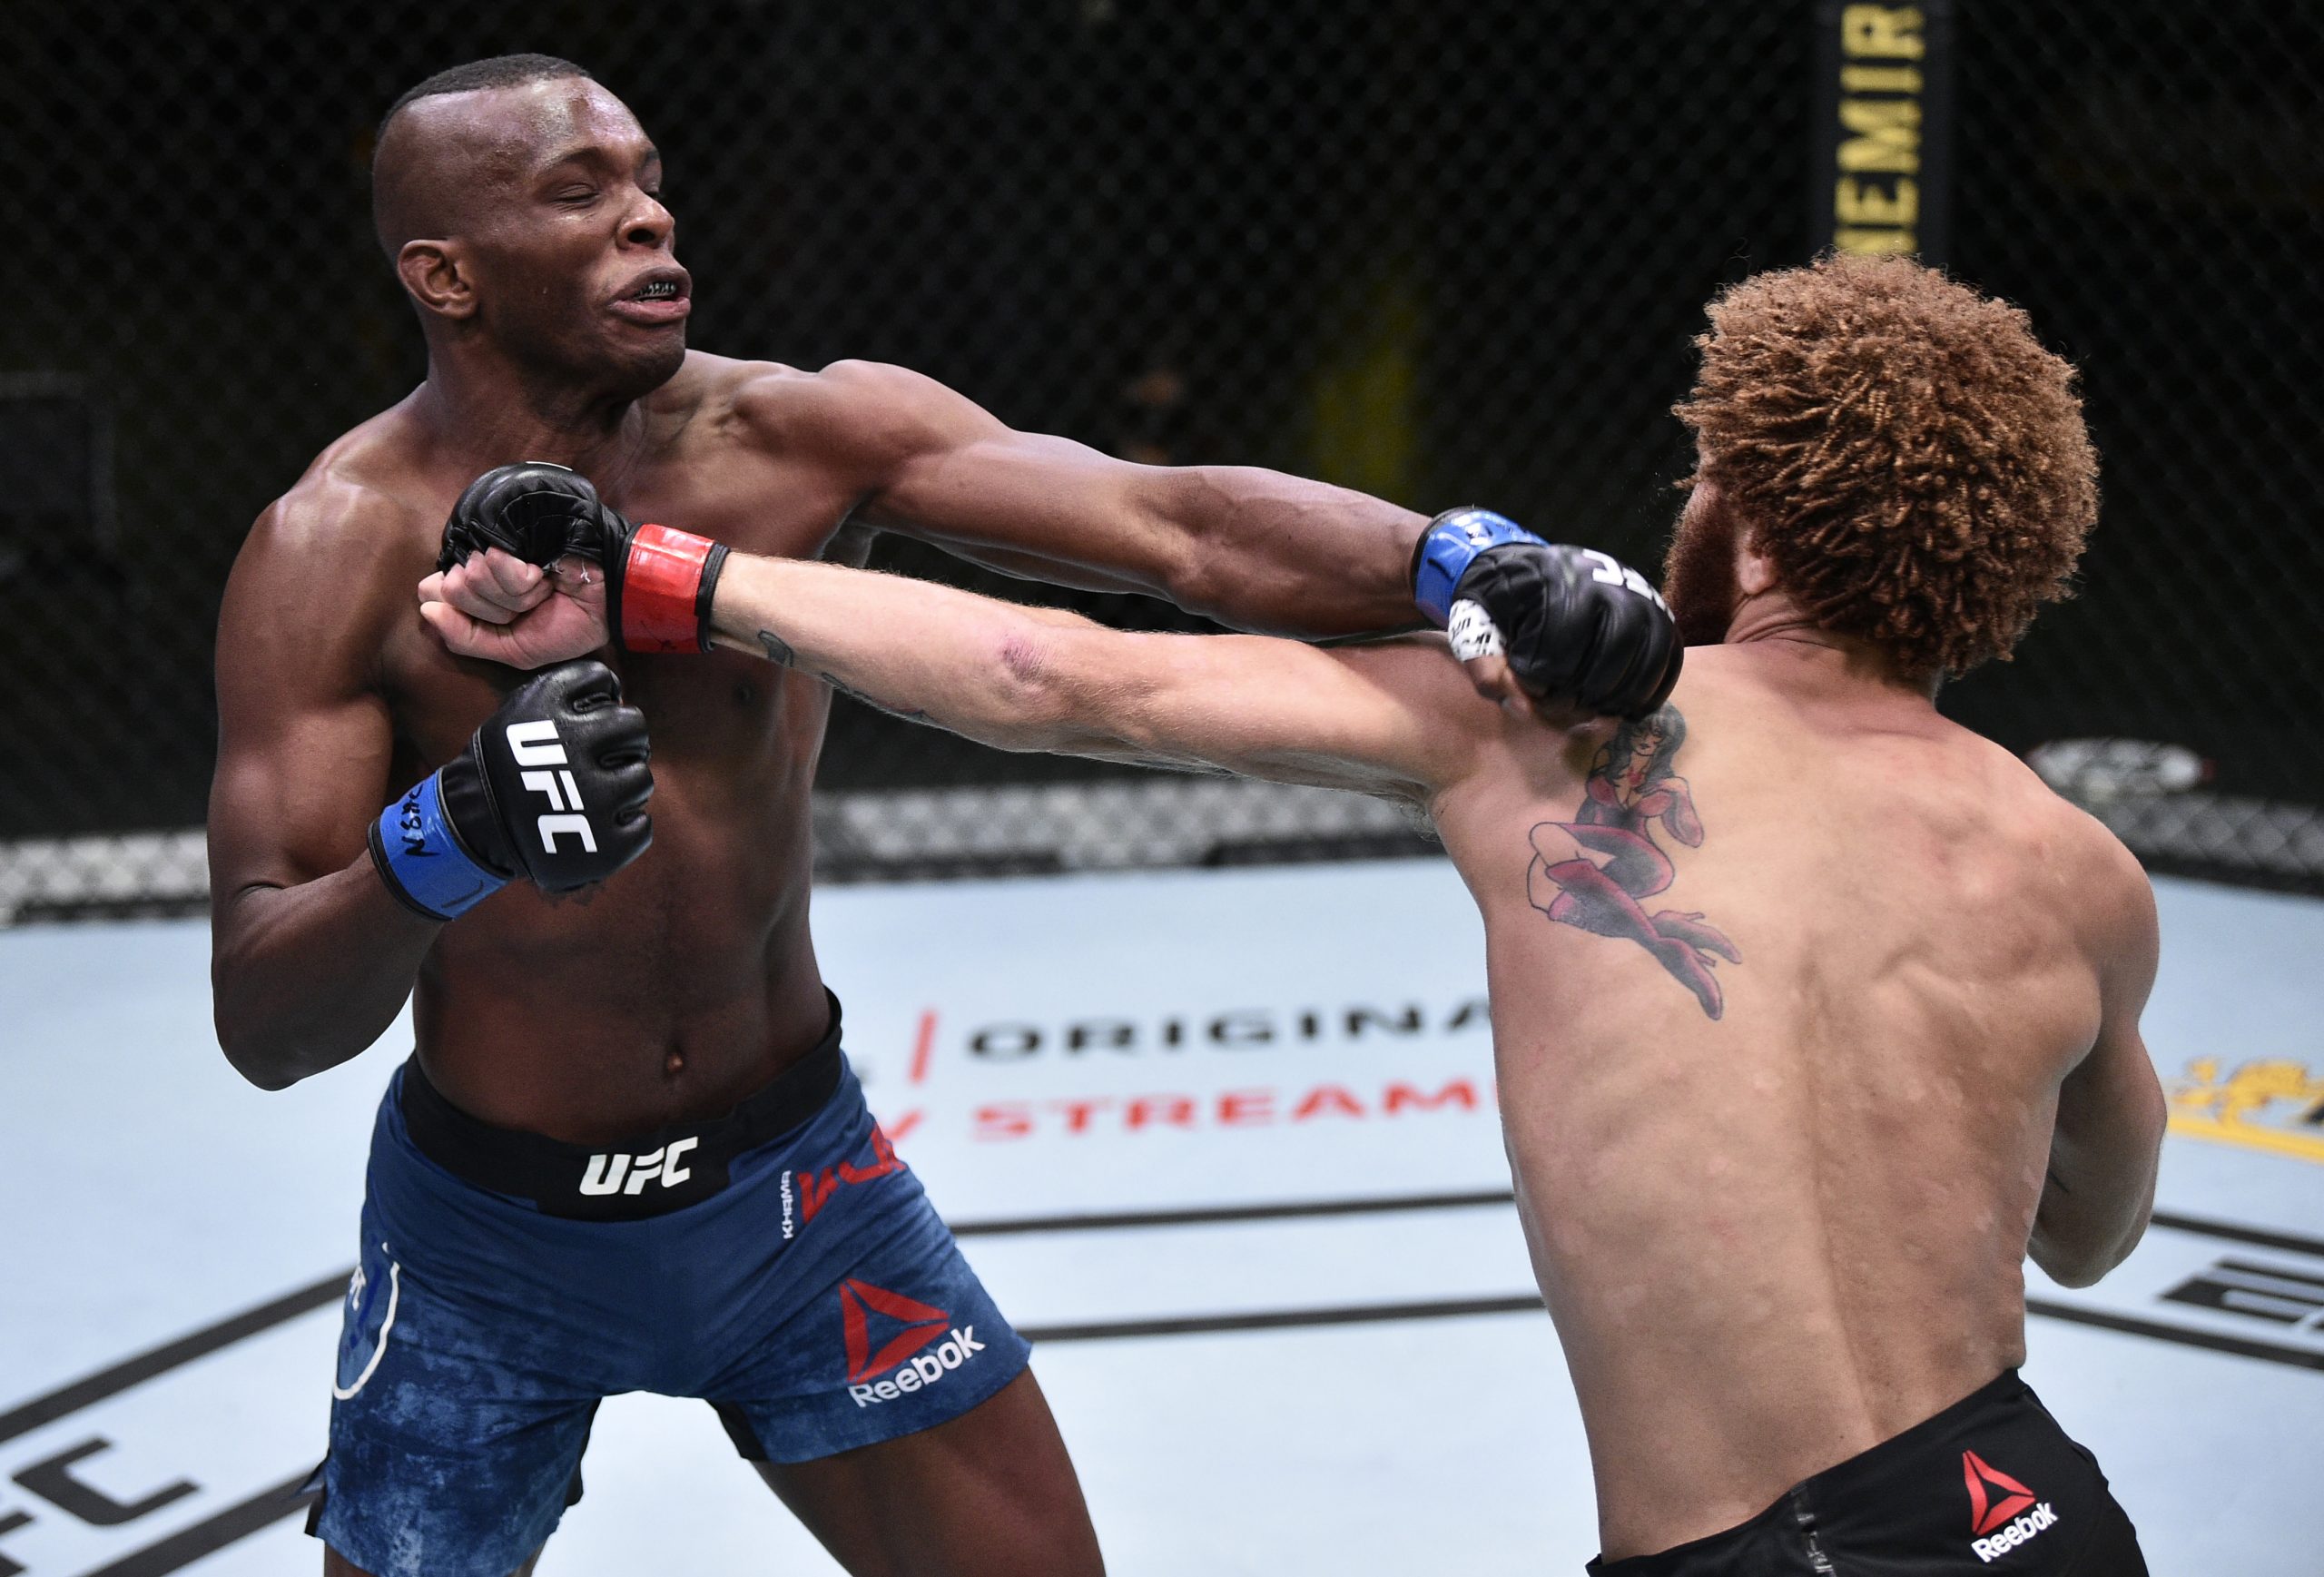 Khama Worthy defeated Luis Pena in his second UFC fight